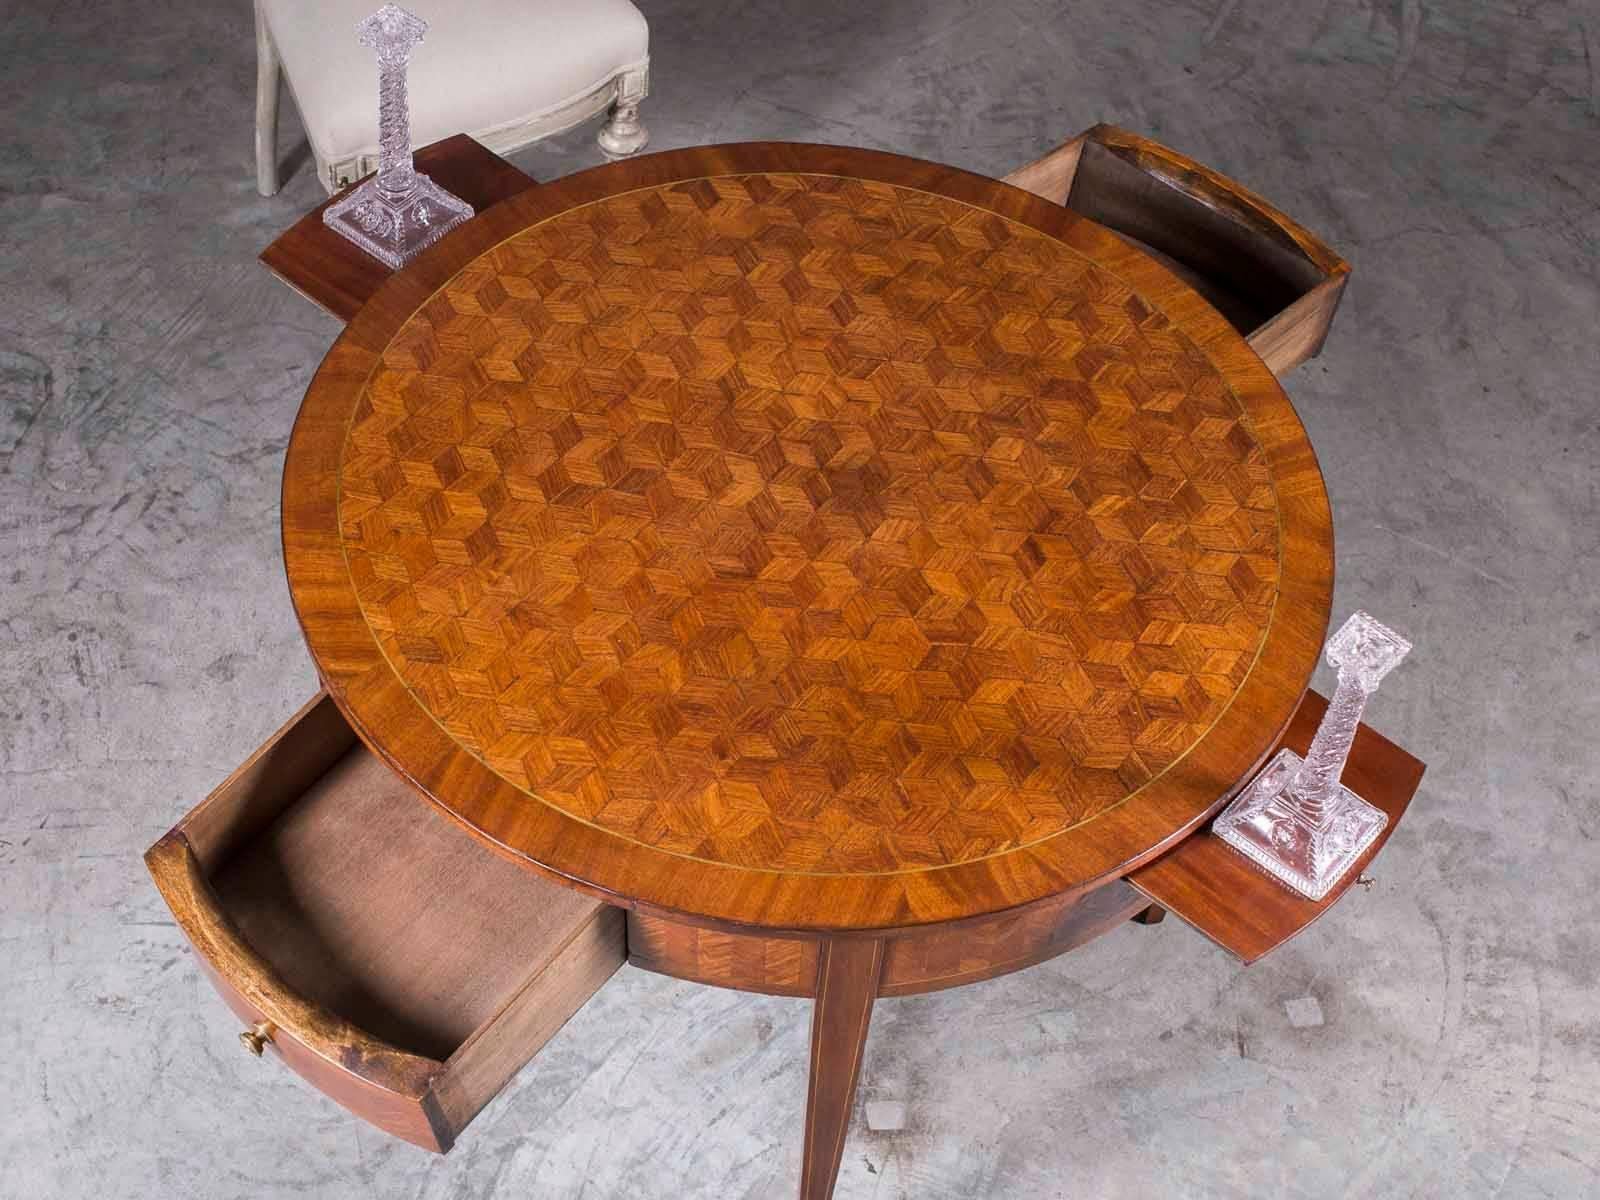 This handsome antique French Louis XVI round walnut table from France circa 1885 features a parquet top and apron along with two drawers and two candle slides. In the eighteenth century gambling was a common pastime and game tables were an essential